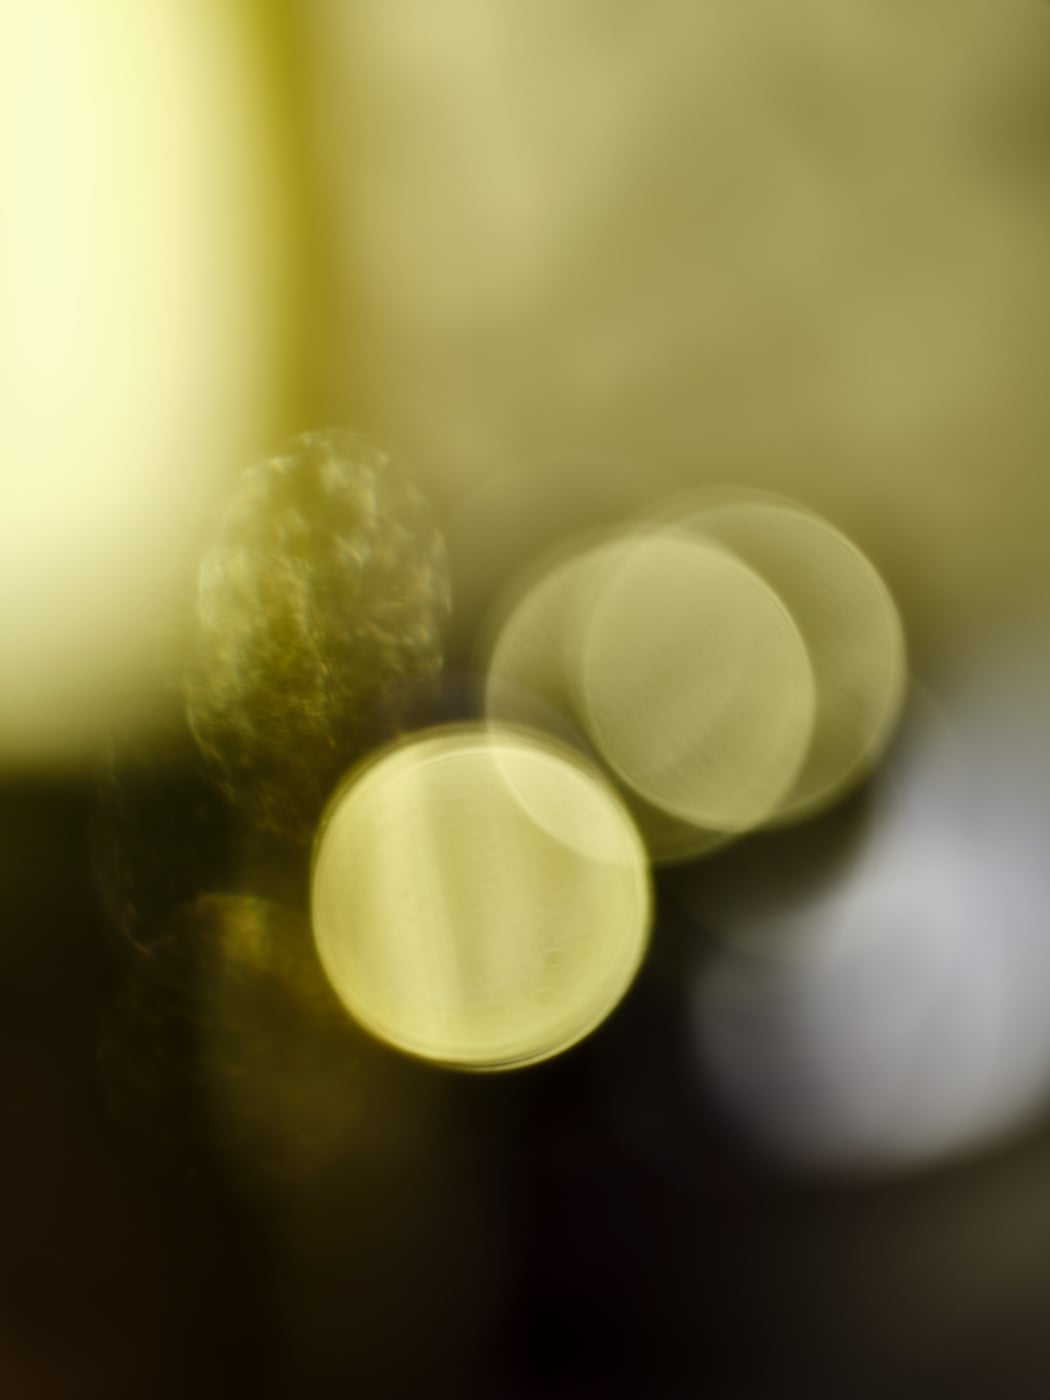 406 megapixels! A very high resolution, abstract photo of light; photograph created by David Lineton.